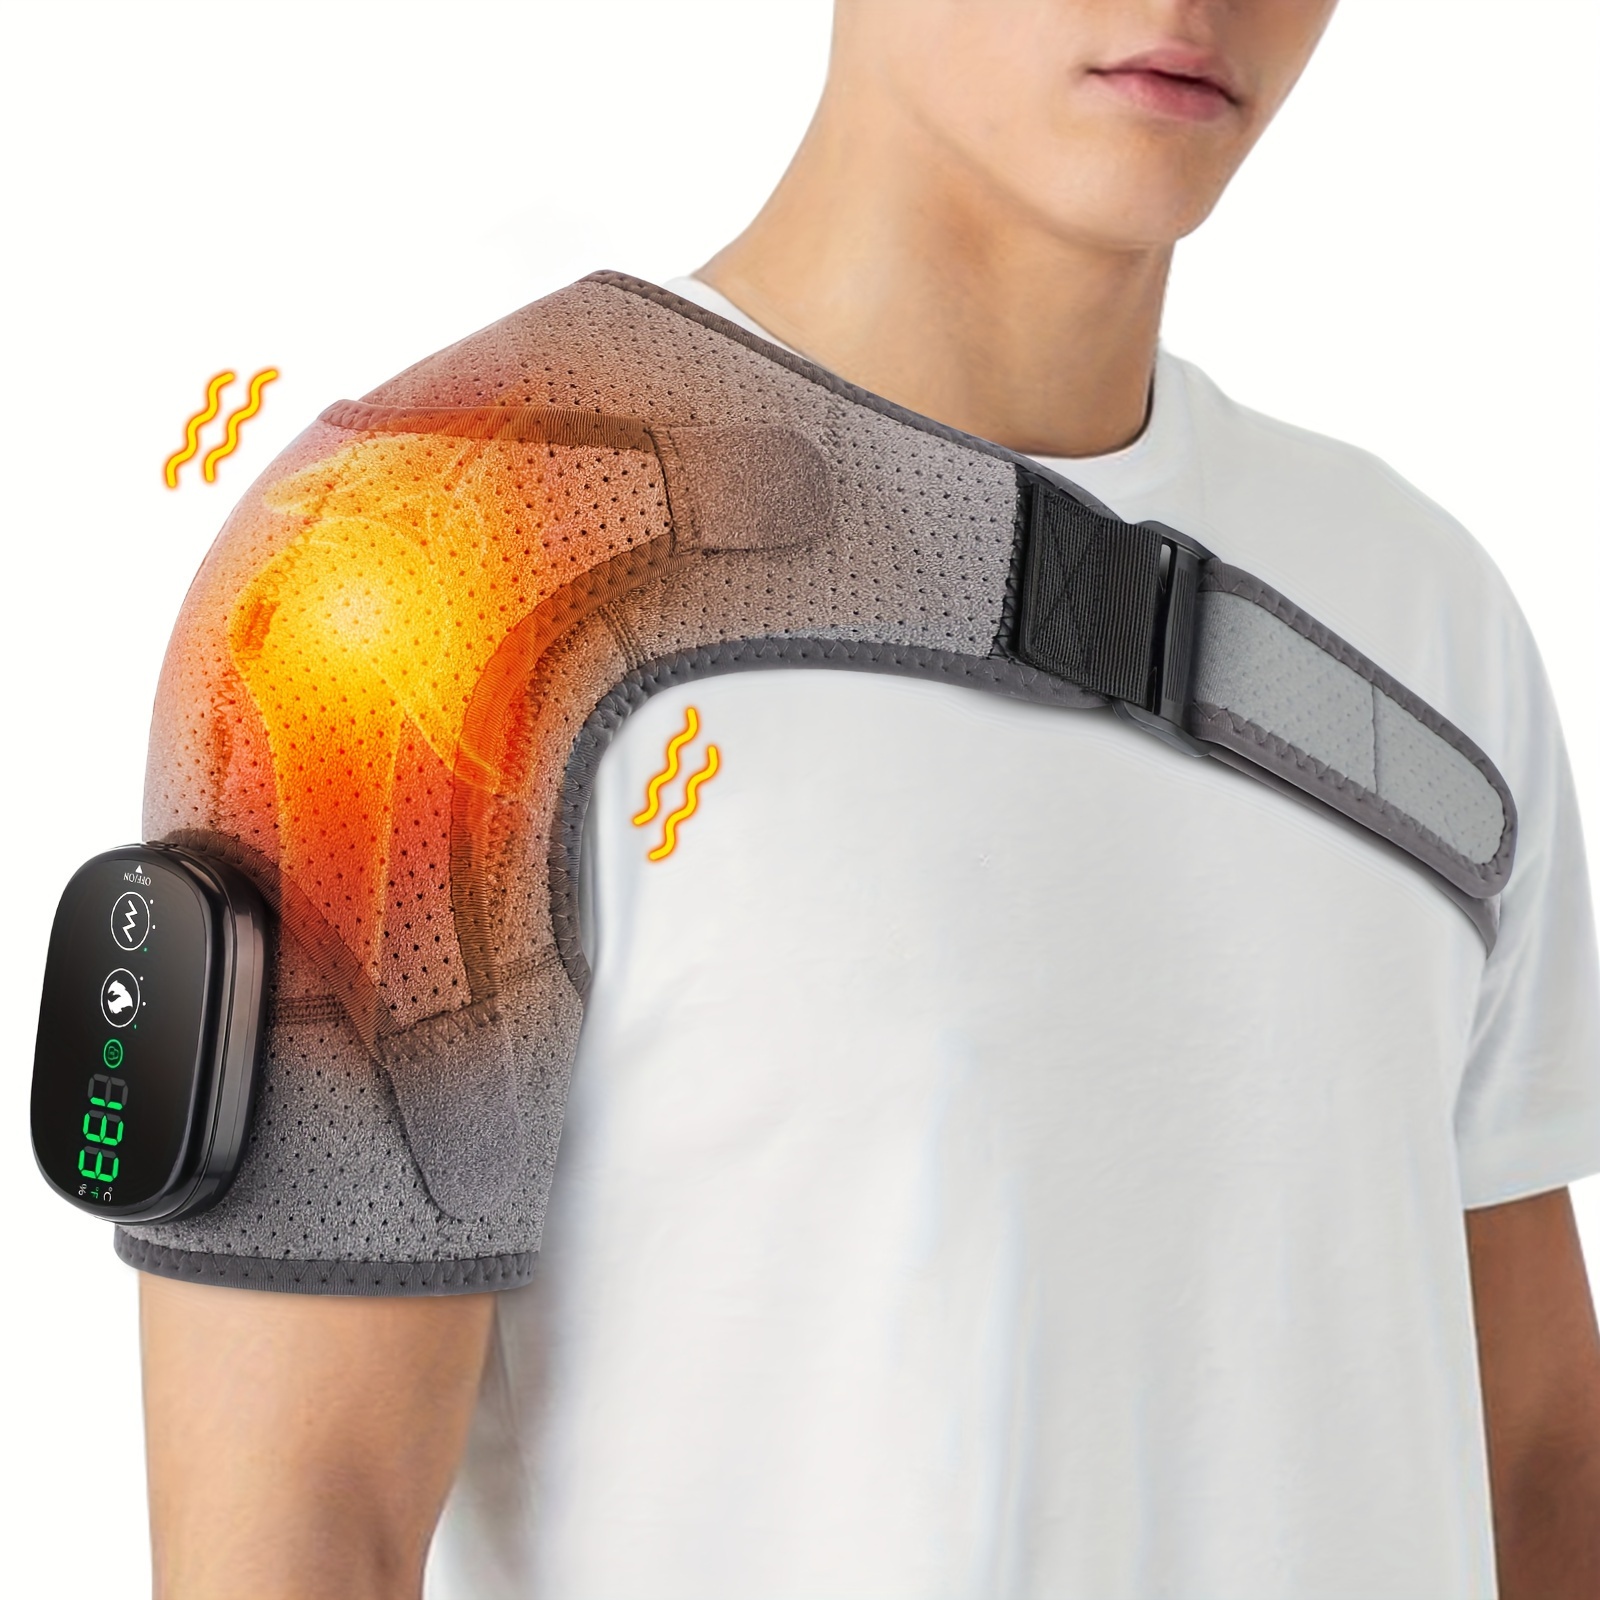 

1pc Heated Shoulder Massager - Soothing Heat Therapy With Deep-kneading Massage For Men And Women - Ergonomic Shoulder Strap Design For Ultimate Relaxation